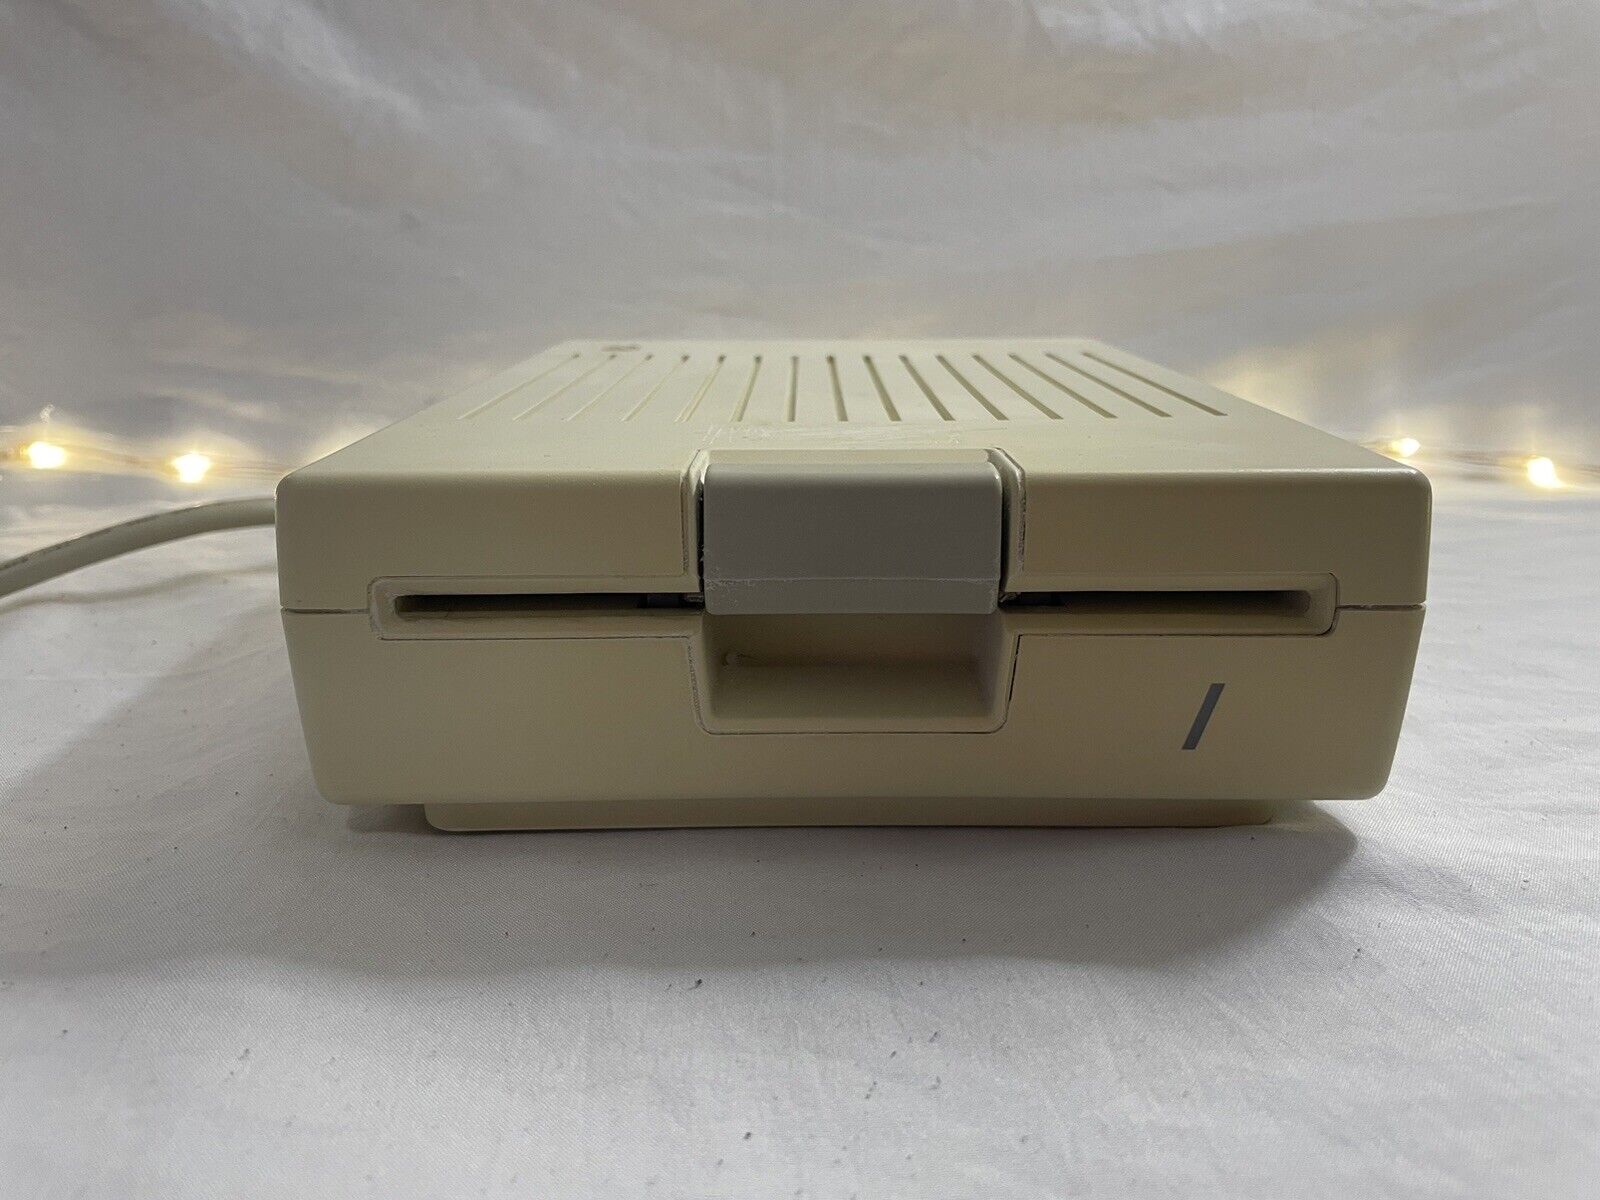 Vintage Apple Disk Drive IIc A2M4050 Floppy Disk Drive